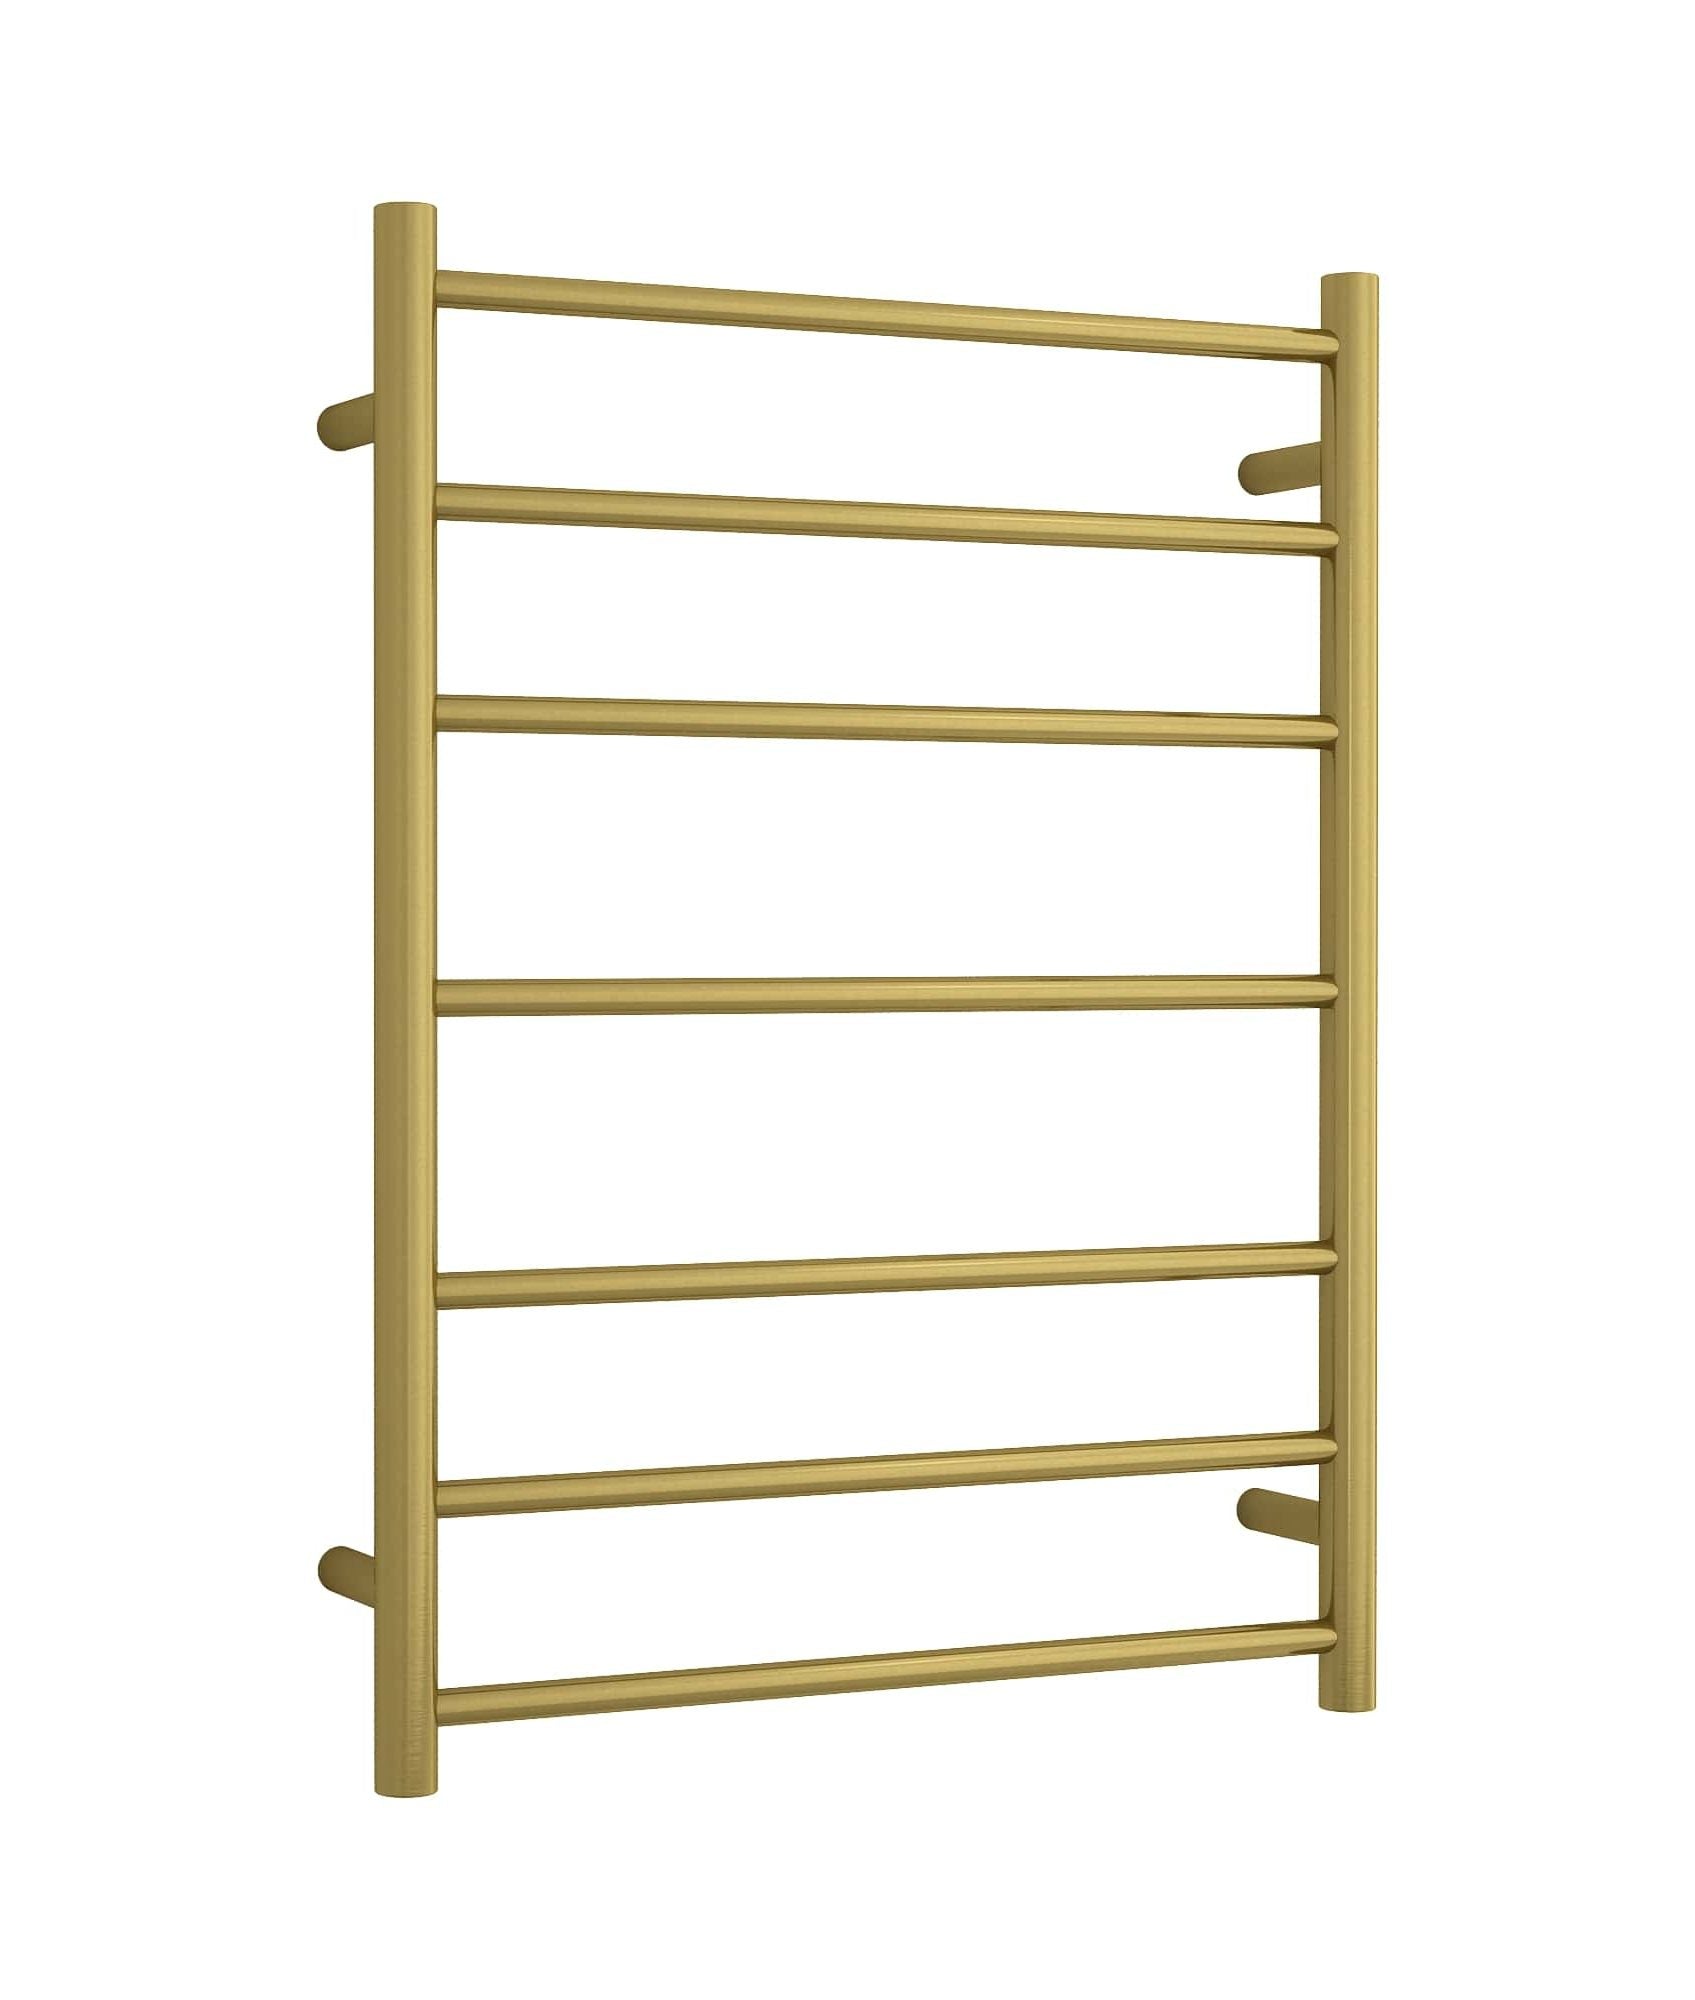 THERMOGROUP ROUND LADDER HEATED TOWEL RAIL BRUSHED GOLD 800MM